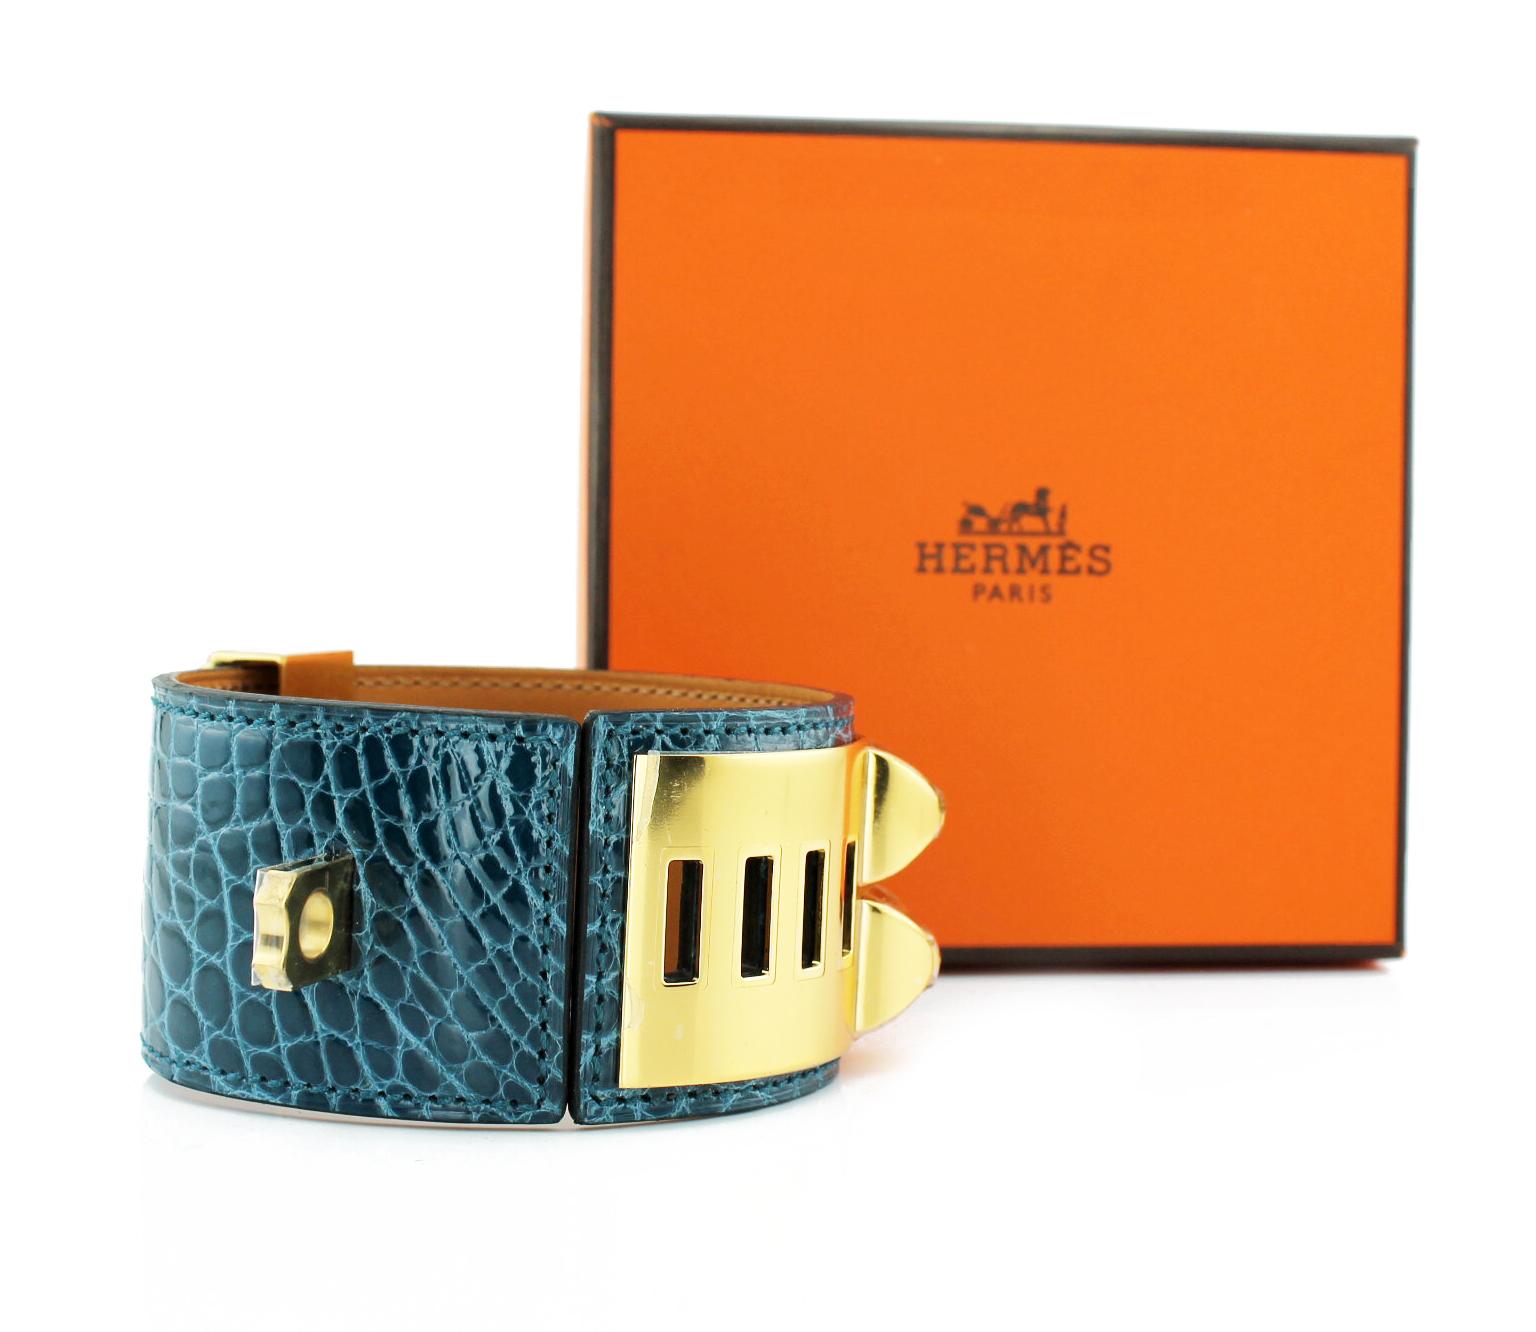 Hermes Collier De Chien Crocodile Cuff
Blue crocodile cuff with gold plated pyramid studs and ring
New with stickers.
Original pouch and box
Size: Small
RRP £1,700